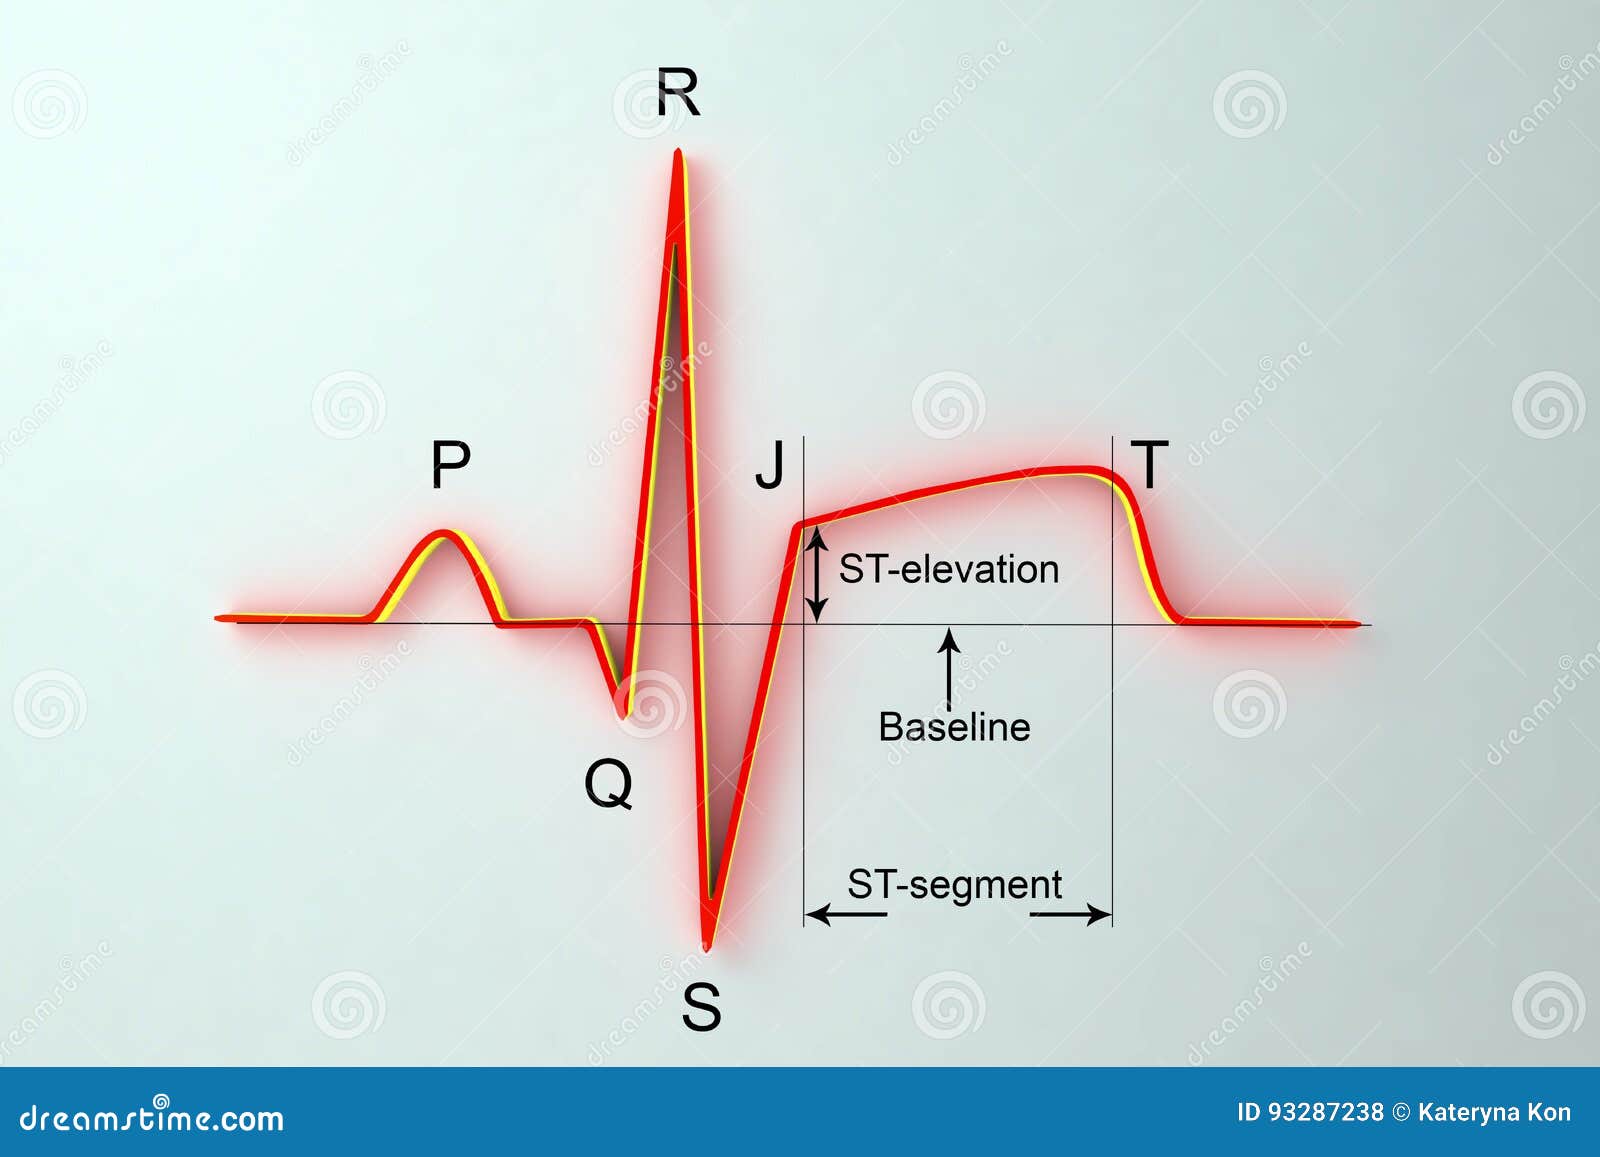 Ecg Chart Labeled